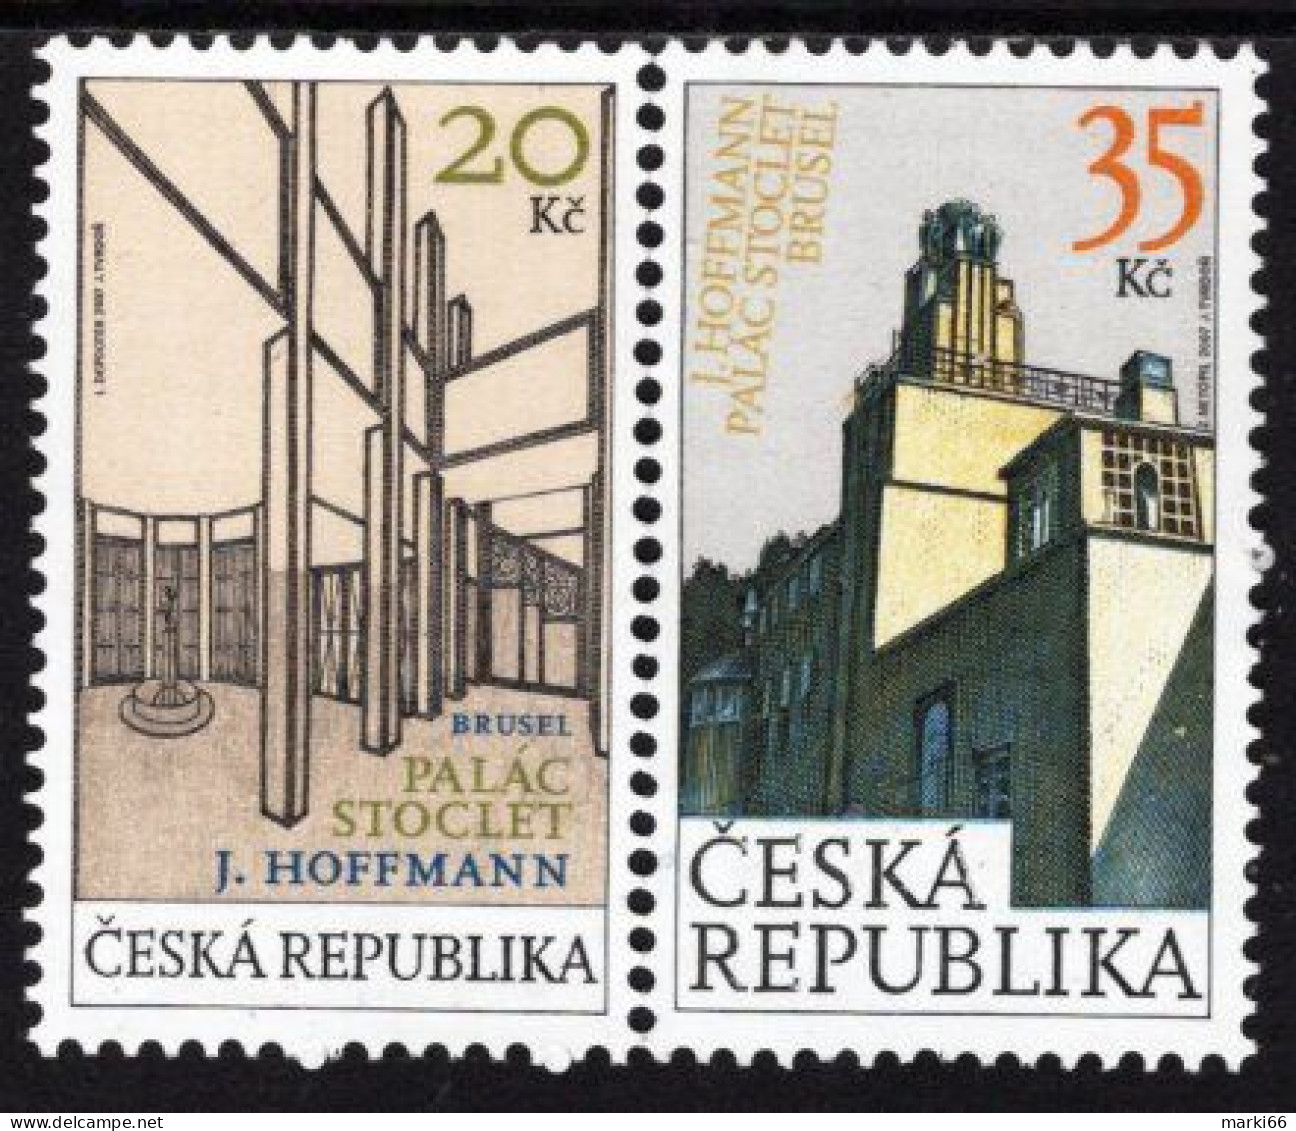 Czech Republic - 2007 - Architecture - Stoclet Palace - Joint Issue With Belgium - Mint Stamp Set - Nuevos